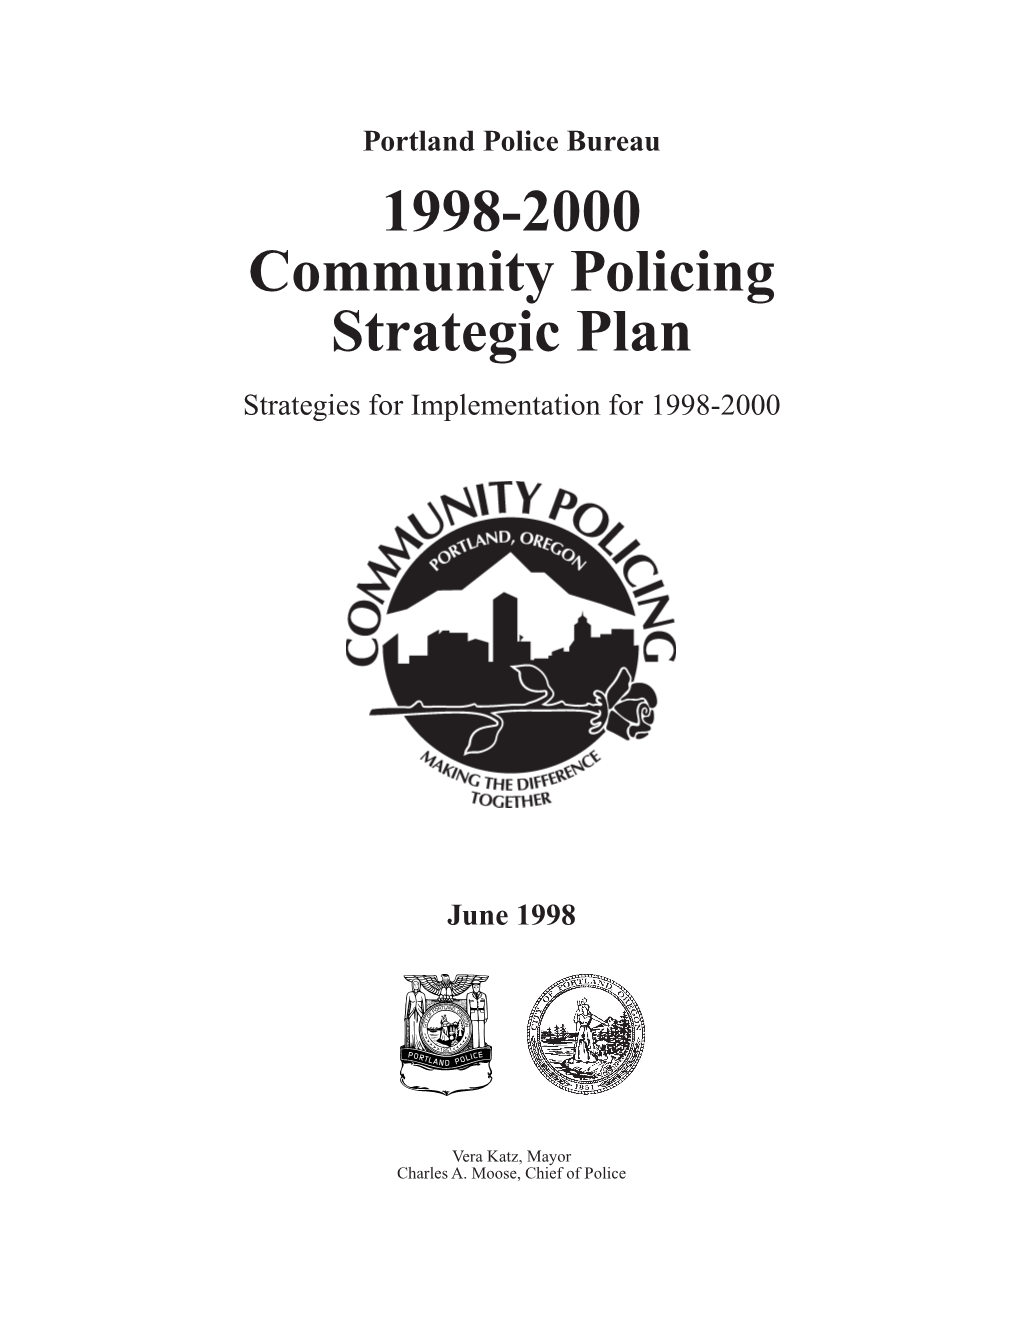 1998-2000 Community Policing Strategic Plan Strategies for Implementation for 1998-2000